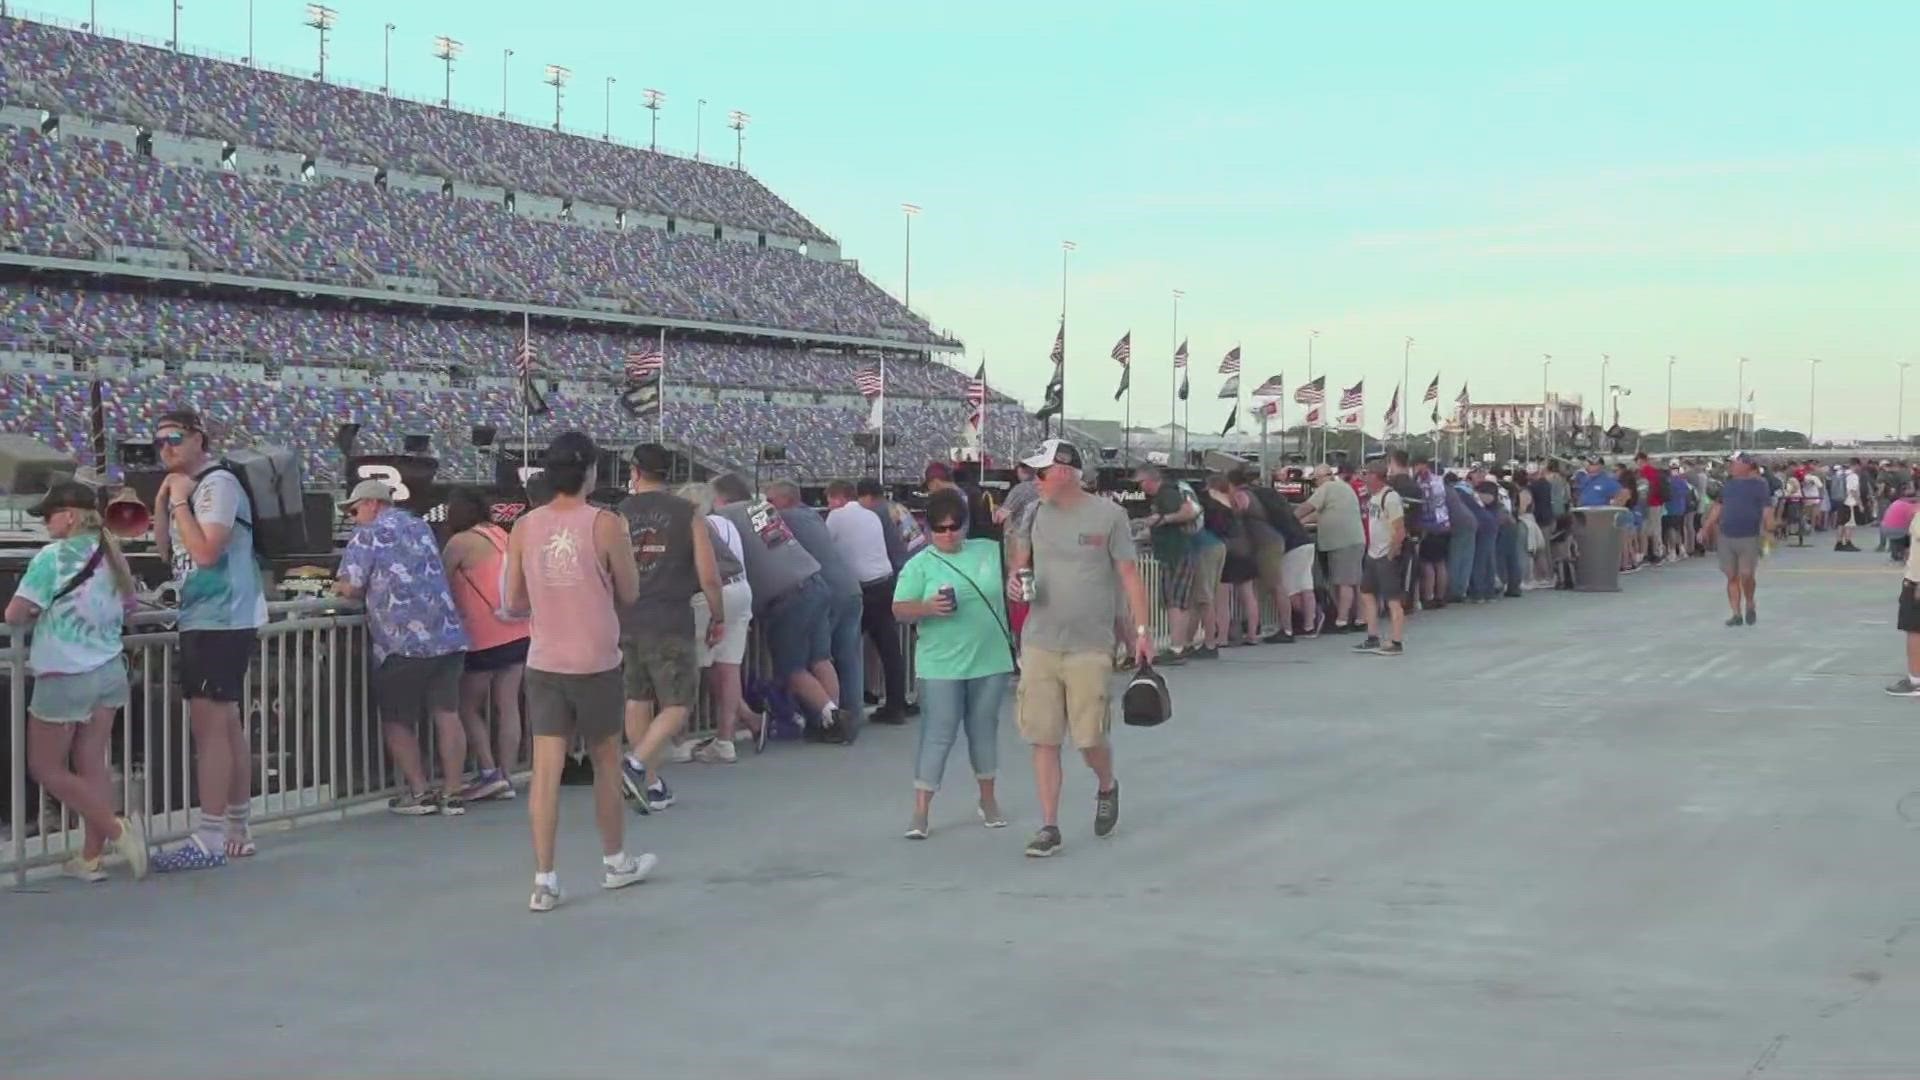 Rev those engines! Fans arrive early to Daytona 500